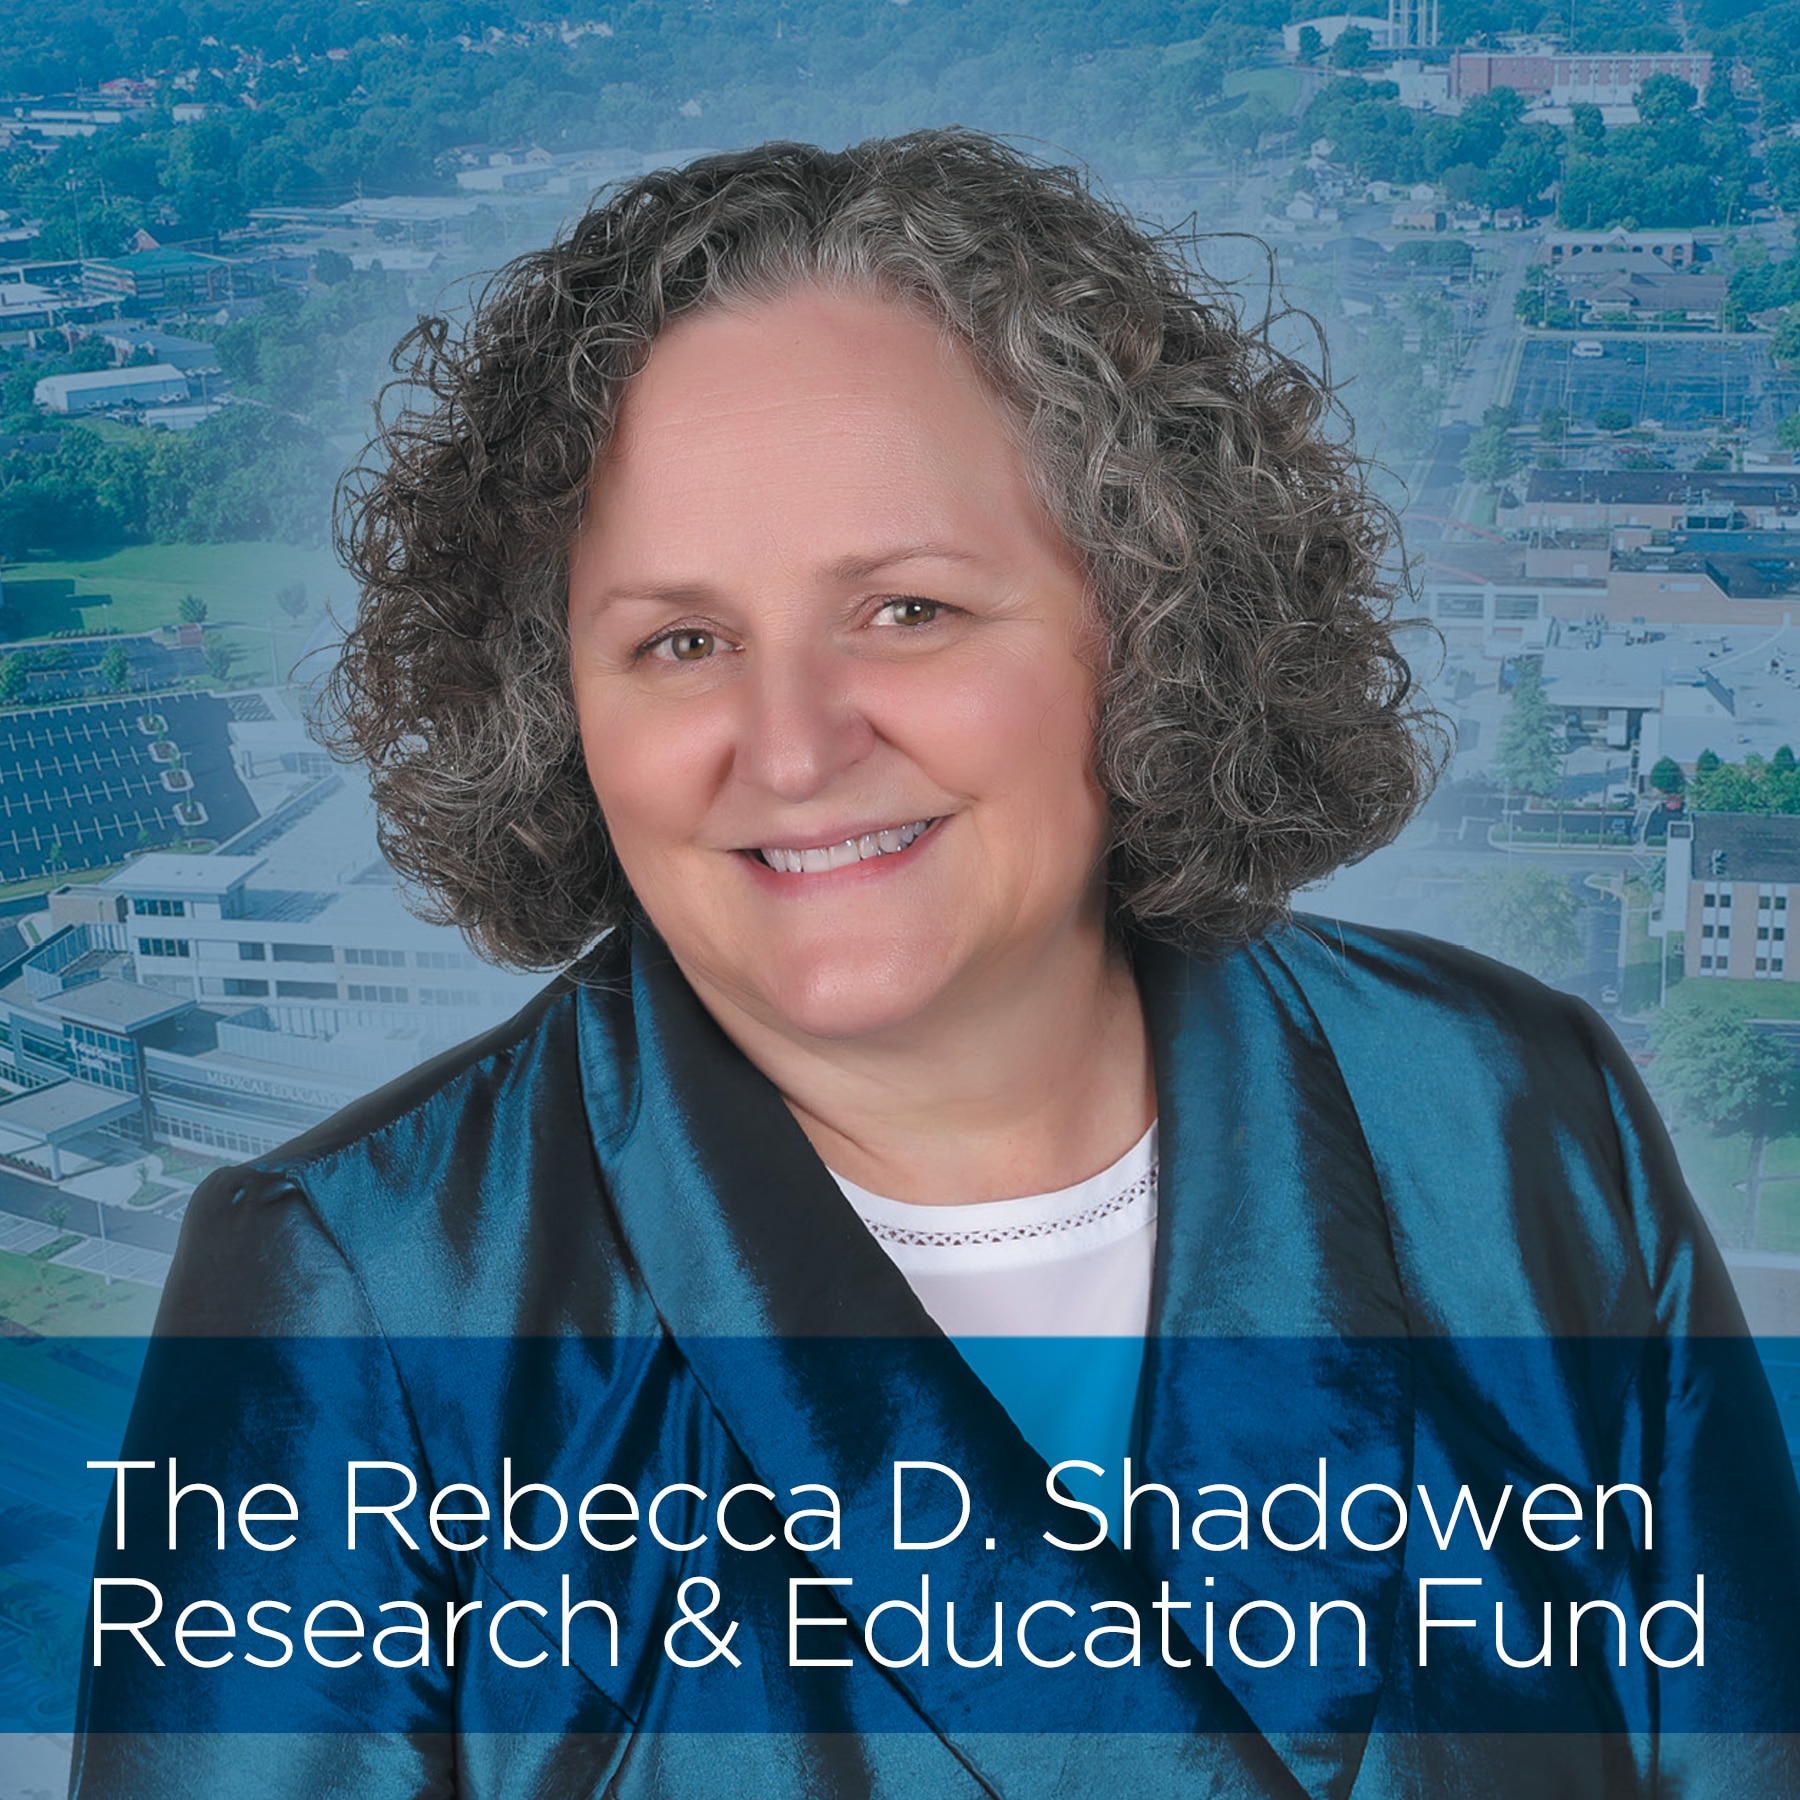 The Rebecca D. Shadowen Research & Education Fund